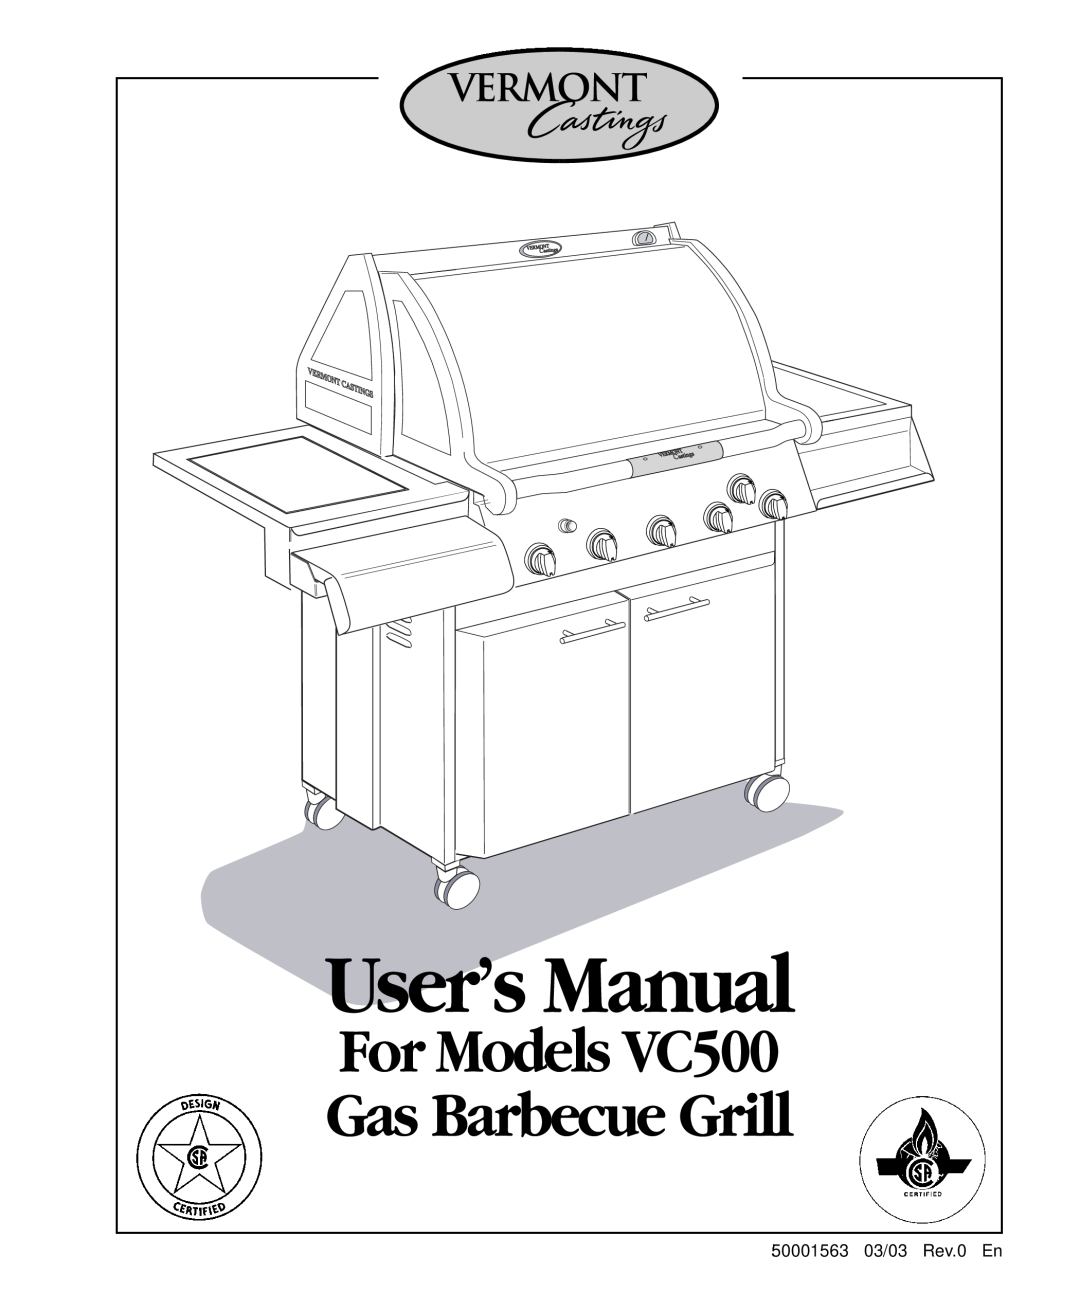 Vermont Casting user manual User’s Manual, Gas Barbecue Grill, For Models VC500, 50001563, 03/03, Rev.0, Vermont 